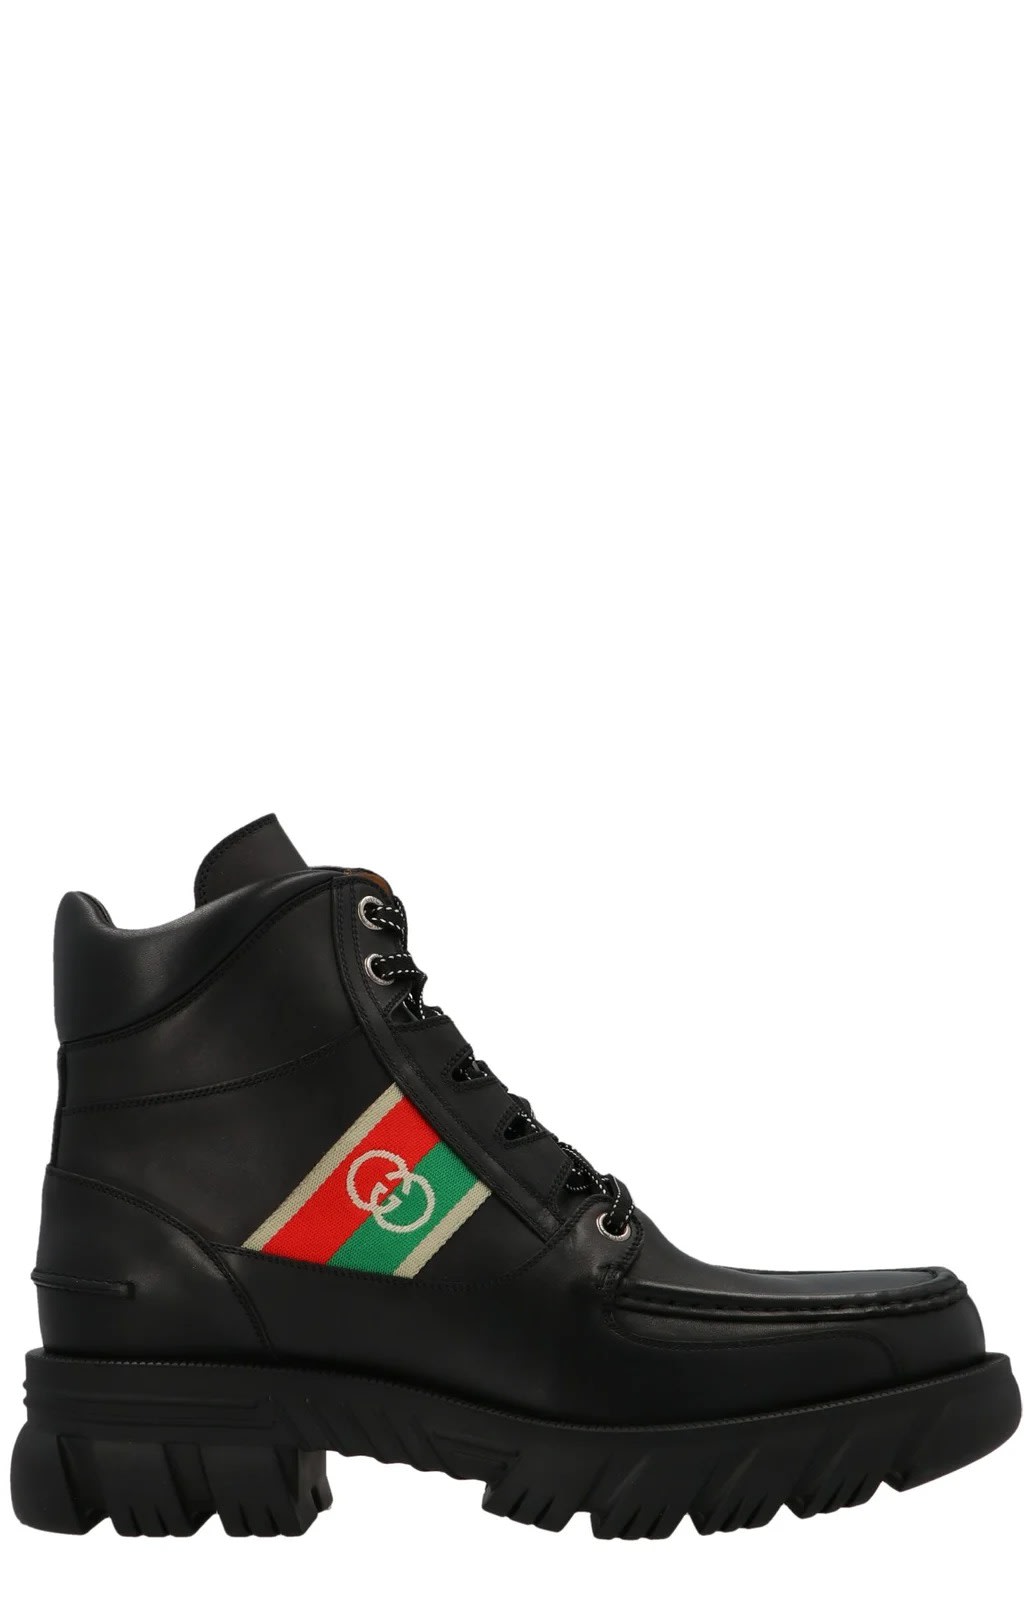 Gucci Ankle Boots With Interlocking G